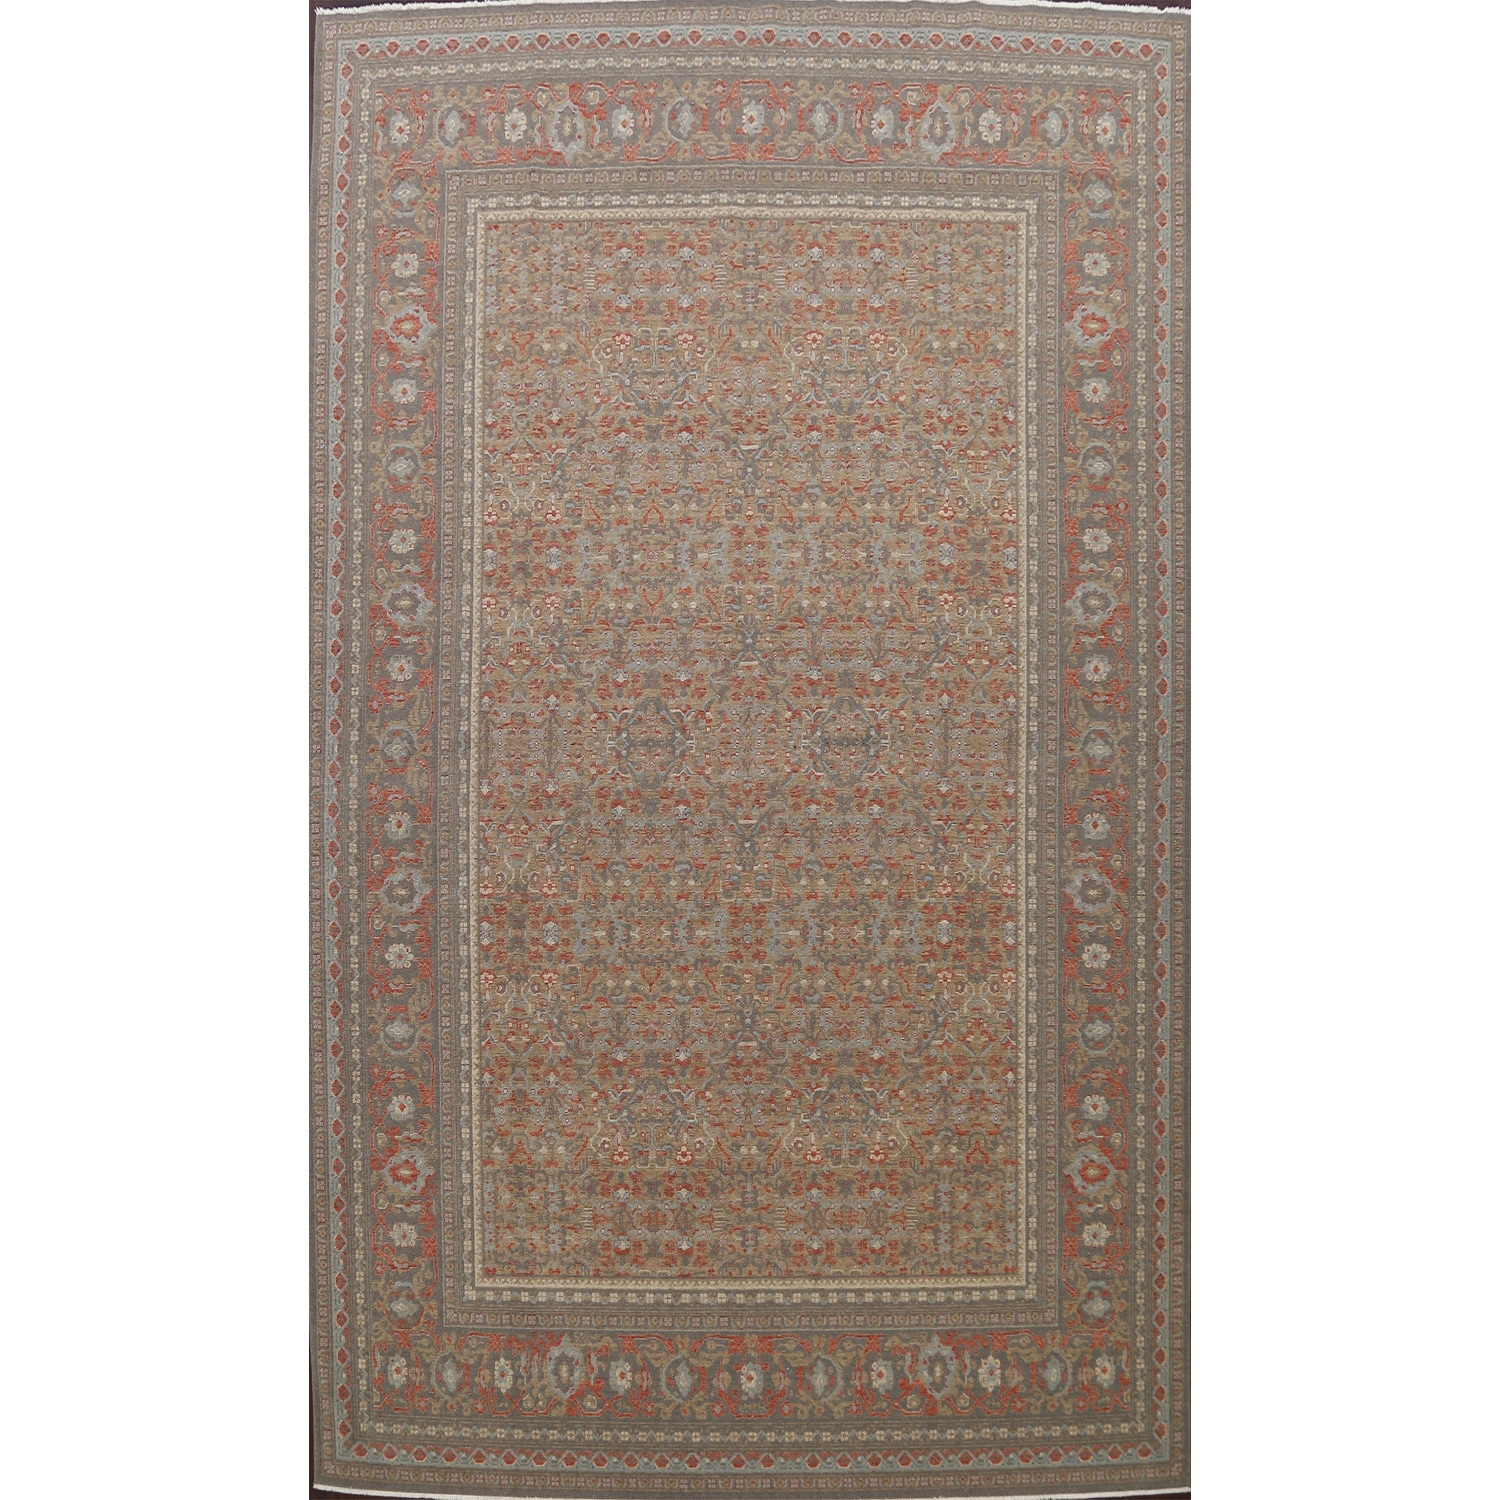 Traditional Silver Washed Ziegler Turkish Area Rug Living Room Carpet 99 X 1210 On Sale Overstock 32671329